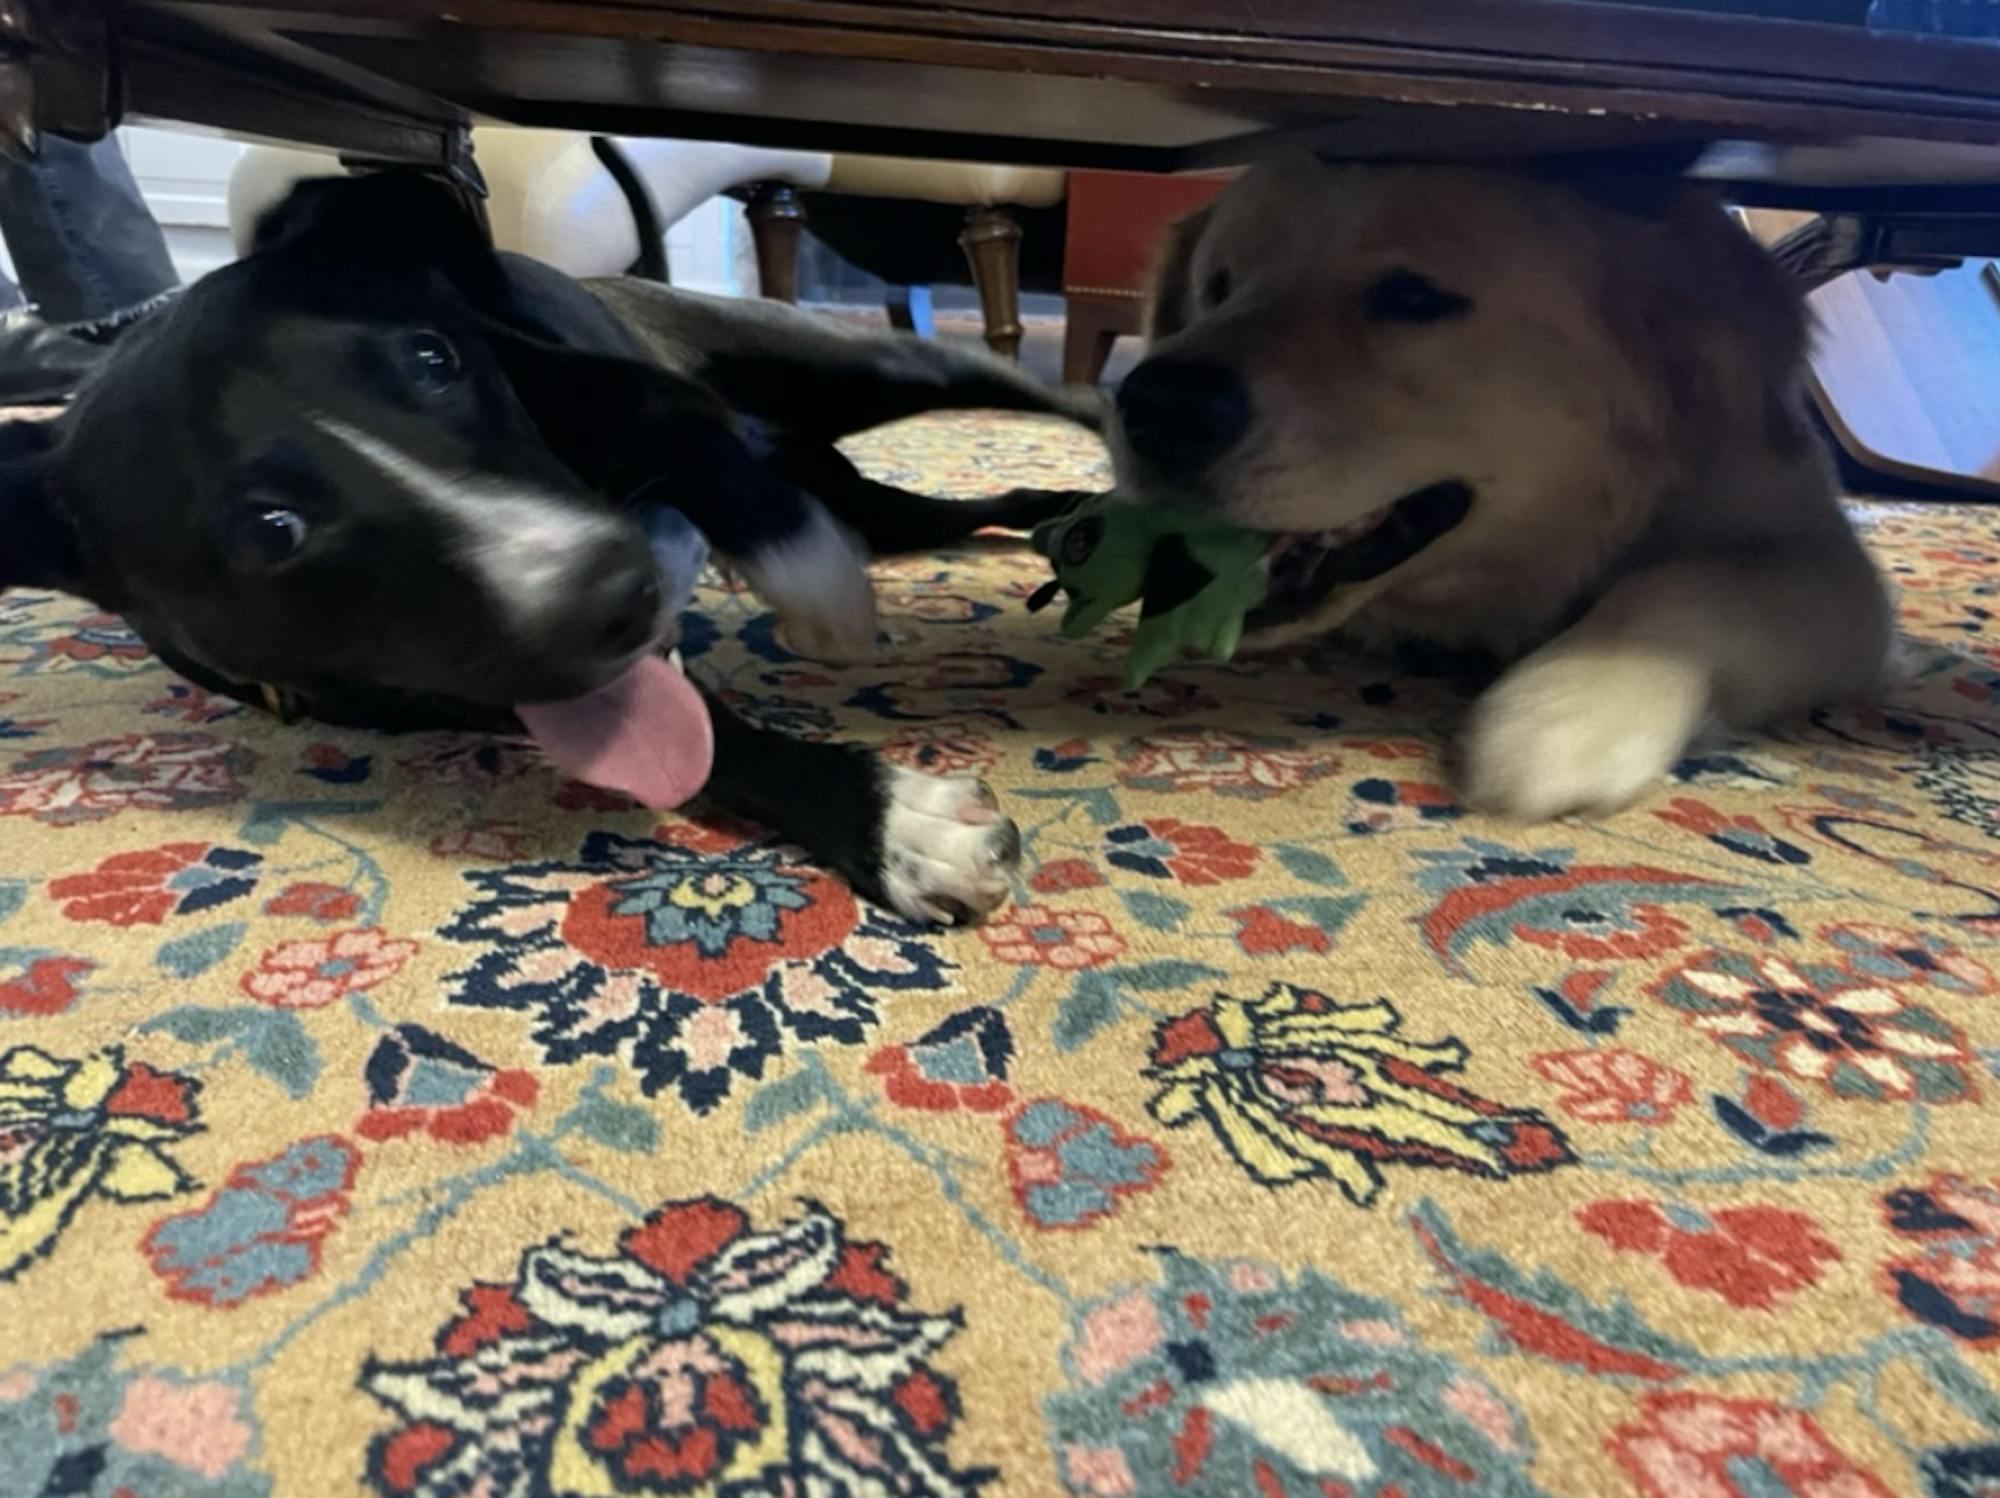 In this image, Fonzie and Lionela play under the coffee table. 